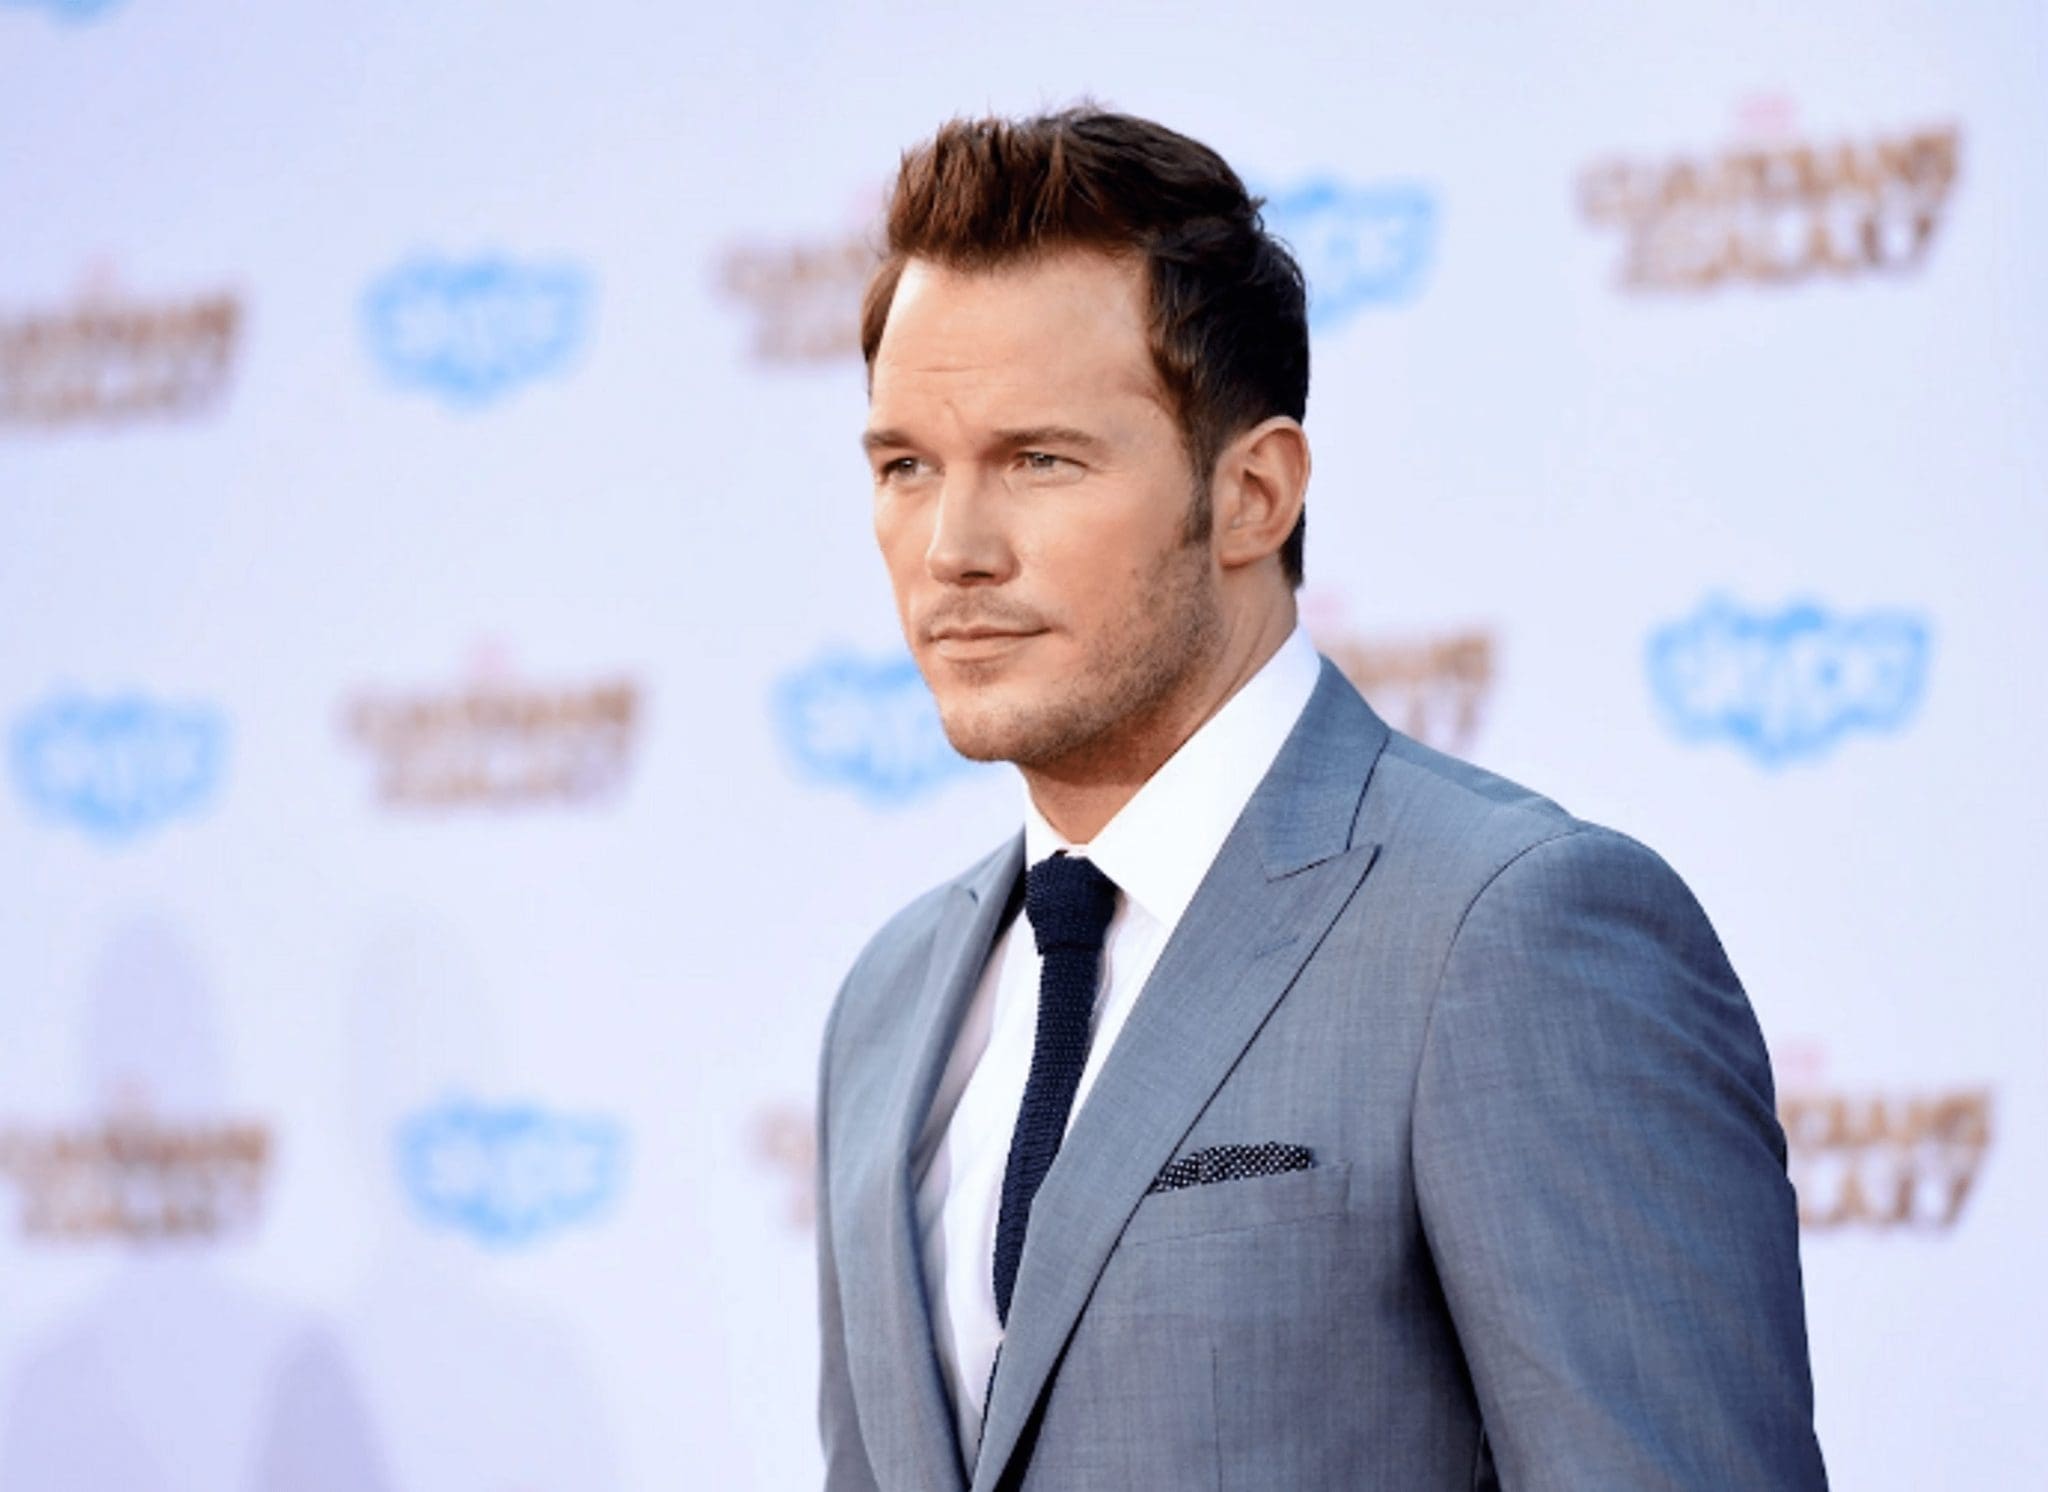 Chris Pratt talked about his father and their tumultuous relationship